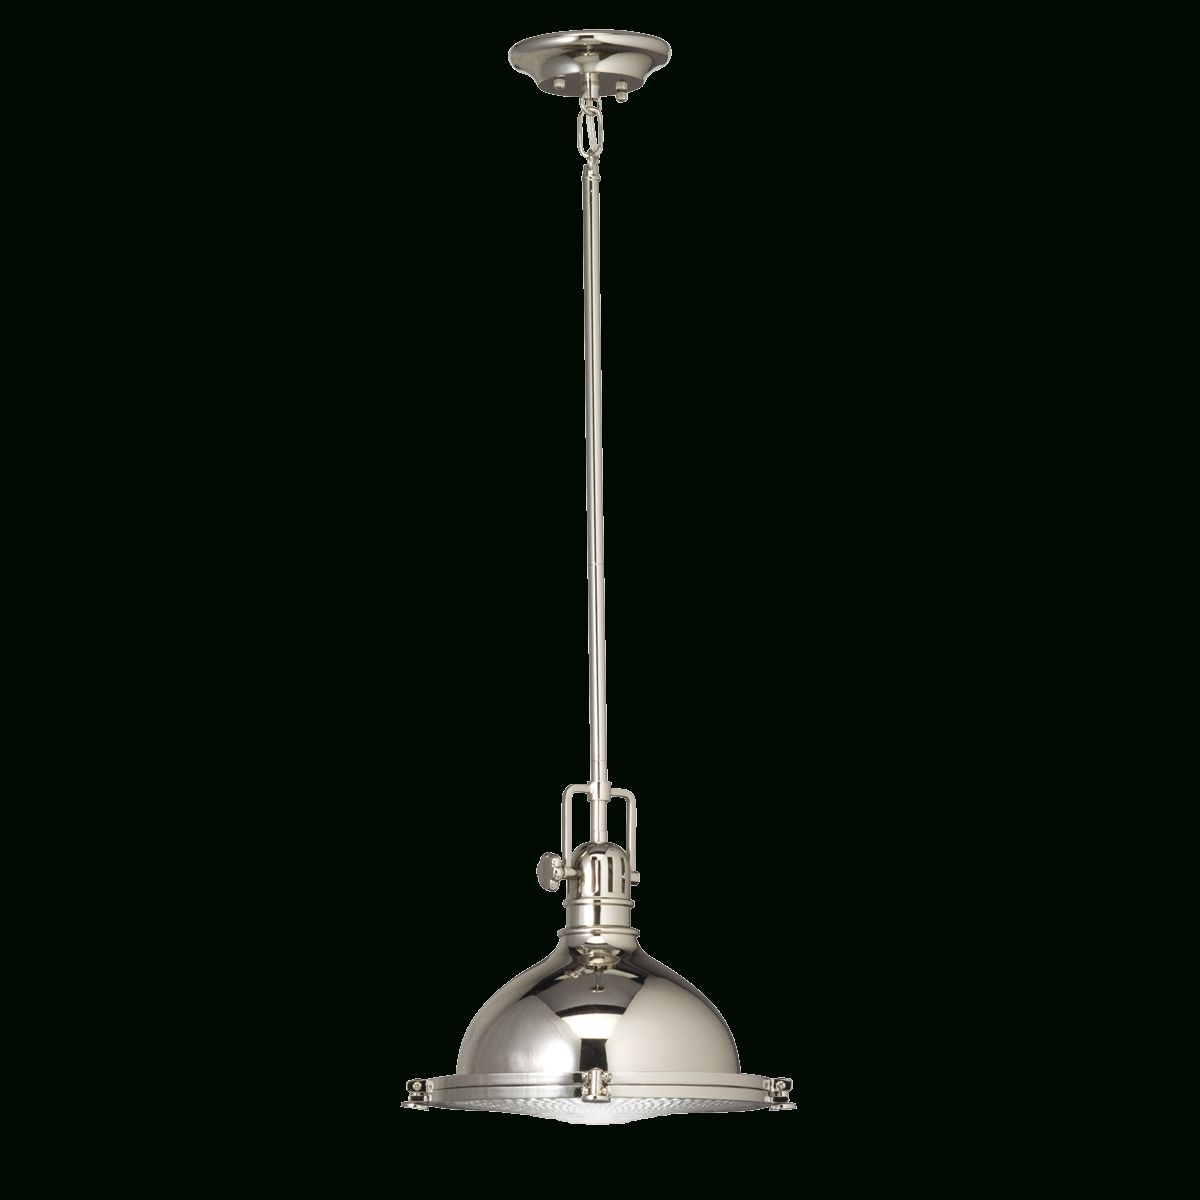 Kichler 1 Light Industrial Pendant (2665pn)| Polished Nickel Lighting For Kichler Pendant Lighting For Kitchen (View 7 of 15)